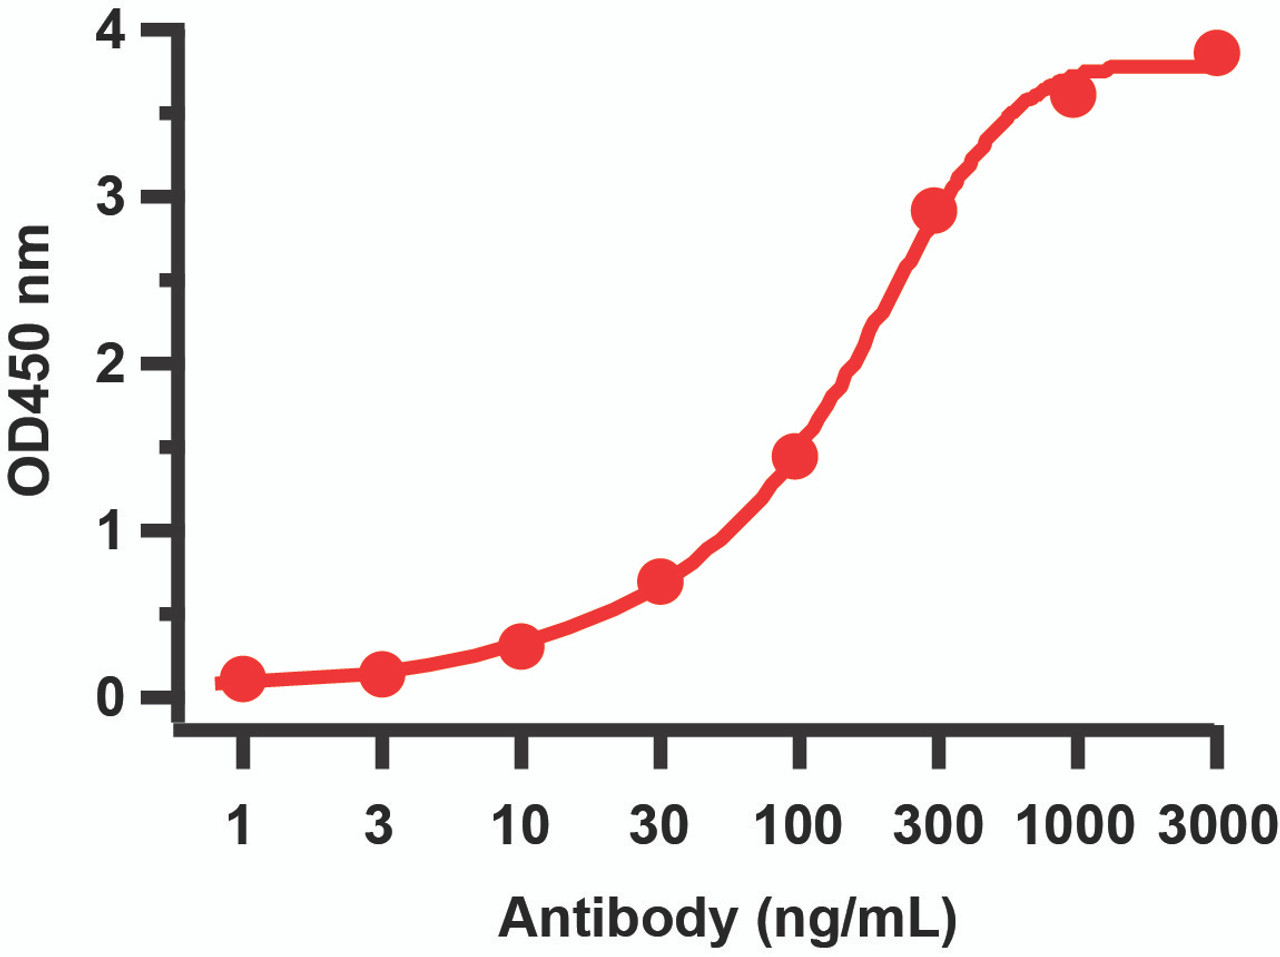 Figure 2 ELISA Validation with SARS-CoV-2 (COVID-19) NSP13 (Helicase) Protein 
Antibodies: SARS-CoV-2 (COVID-19) NSP13 (Helicase) Antibody, 9183. A direct ELISA was performed using SARS-CoV-2 NSP13 recombinant protein (10-427) as coating antigen and the anti-SARS-CoV-2 (COVID-19) NSP13 (Helicase) antibody as the capture antibody. Secondary: Goat anti-rabbit IgG HRP conjugate at 1:20000 dilution. Detection range is from 1 ng/mL to 3000 ng/mL.